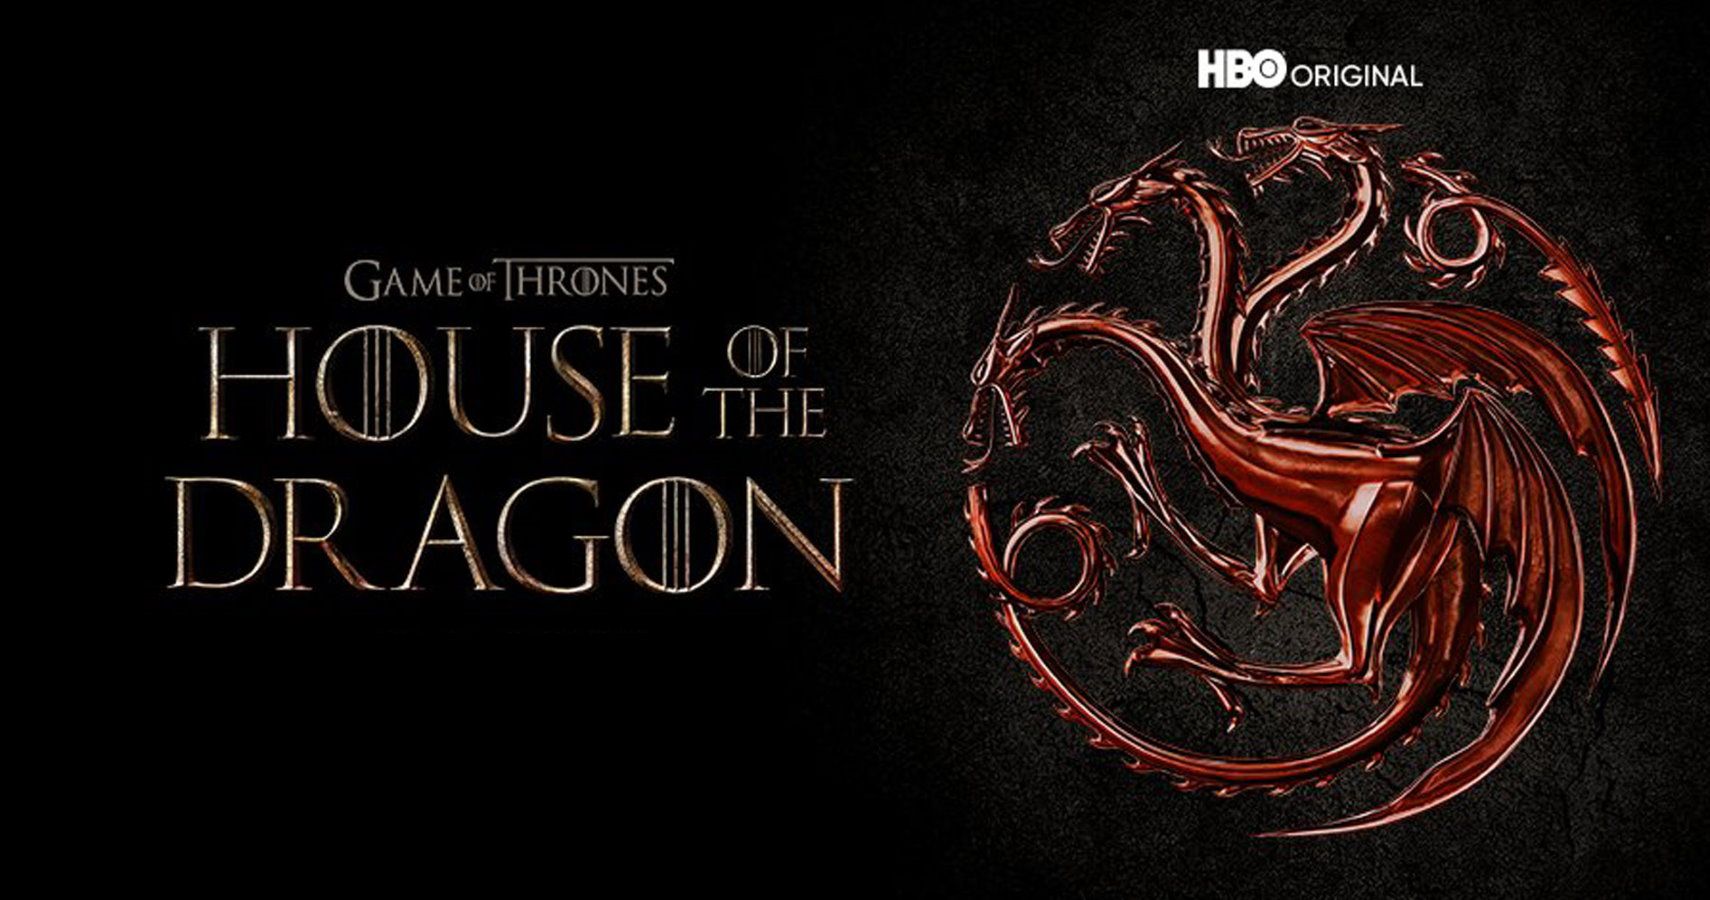 Daenerys Targaryen Makes It Hard To Care About House Of The Dragon